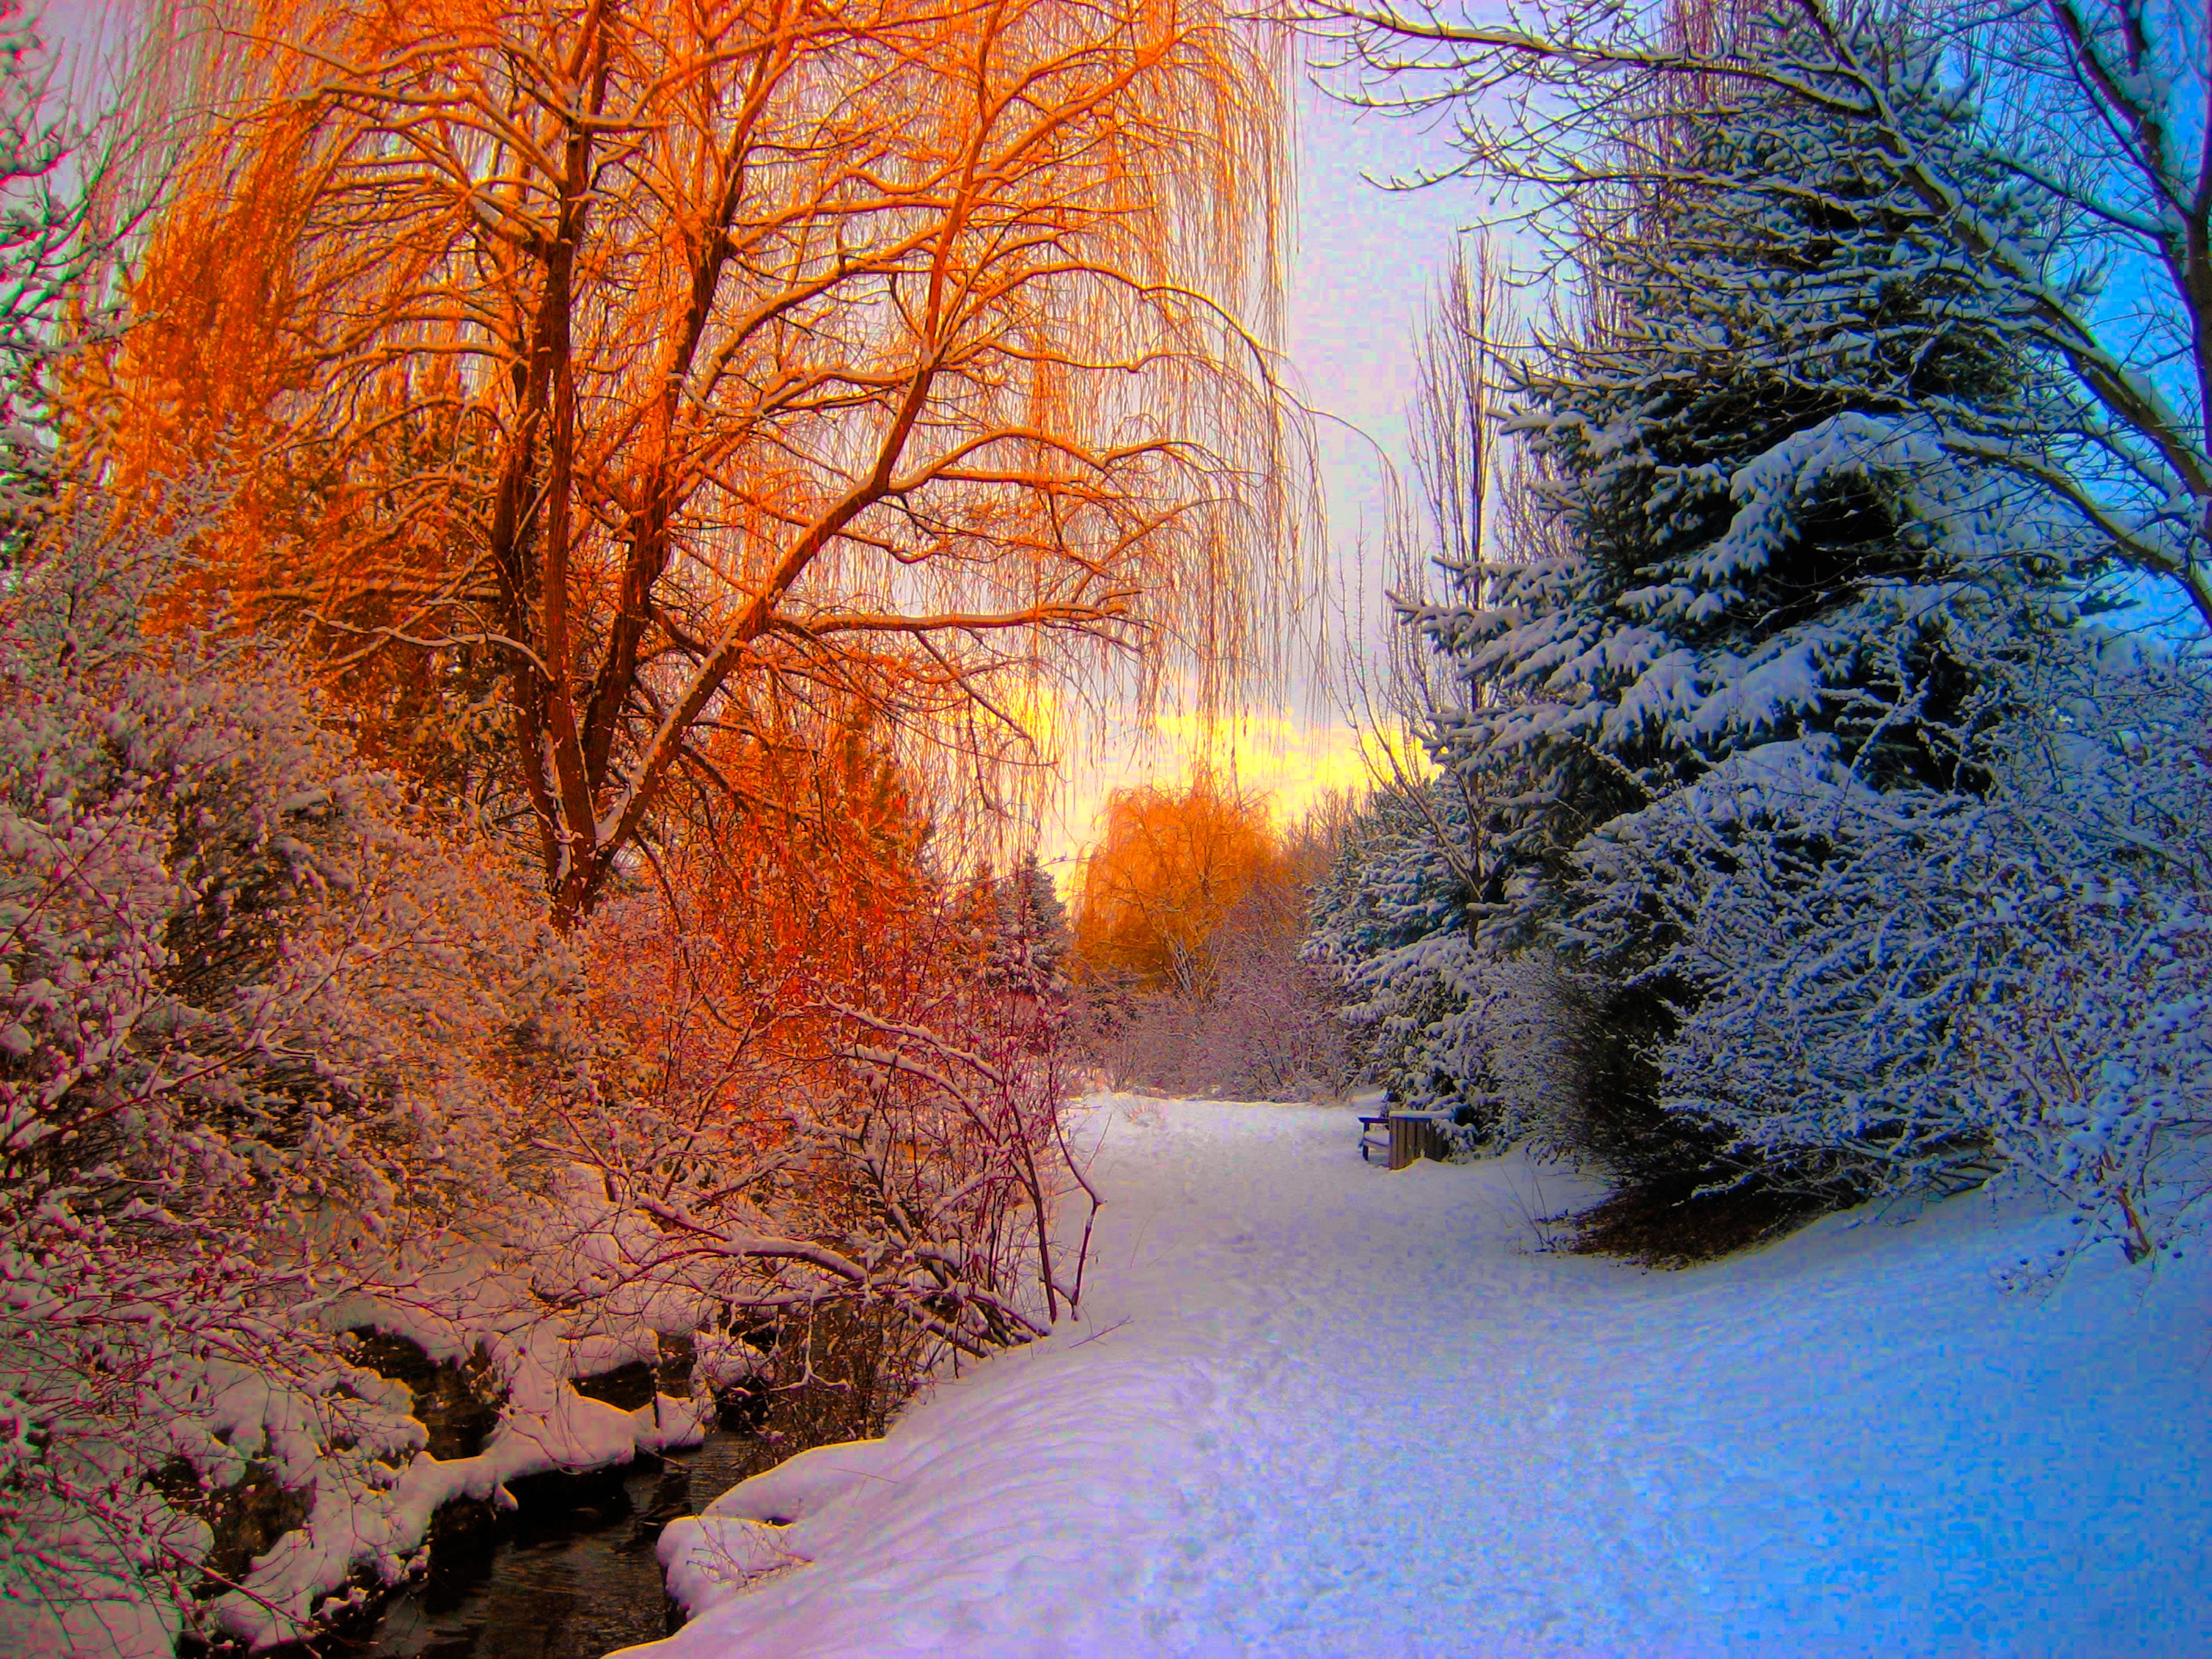 Orange and blue and white snow forest photo